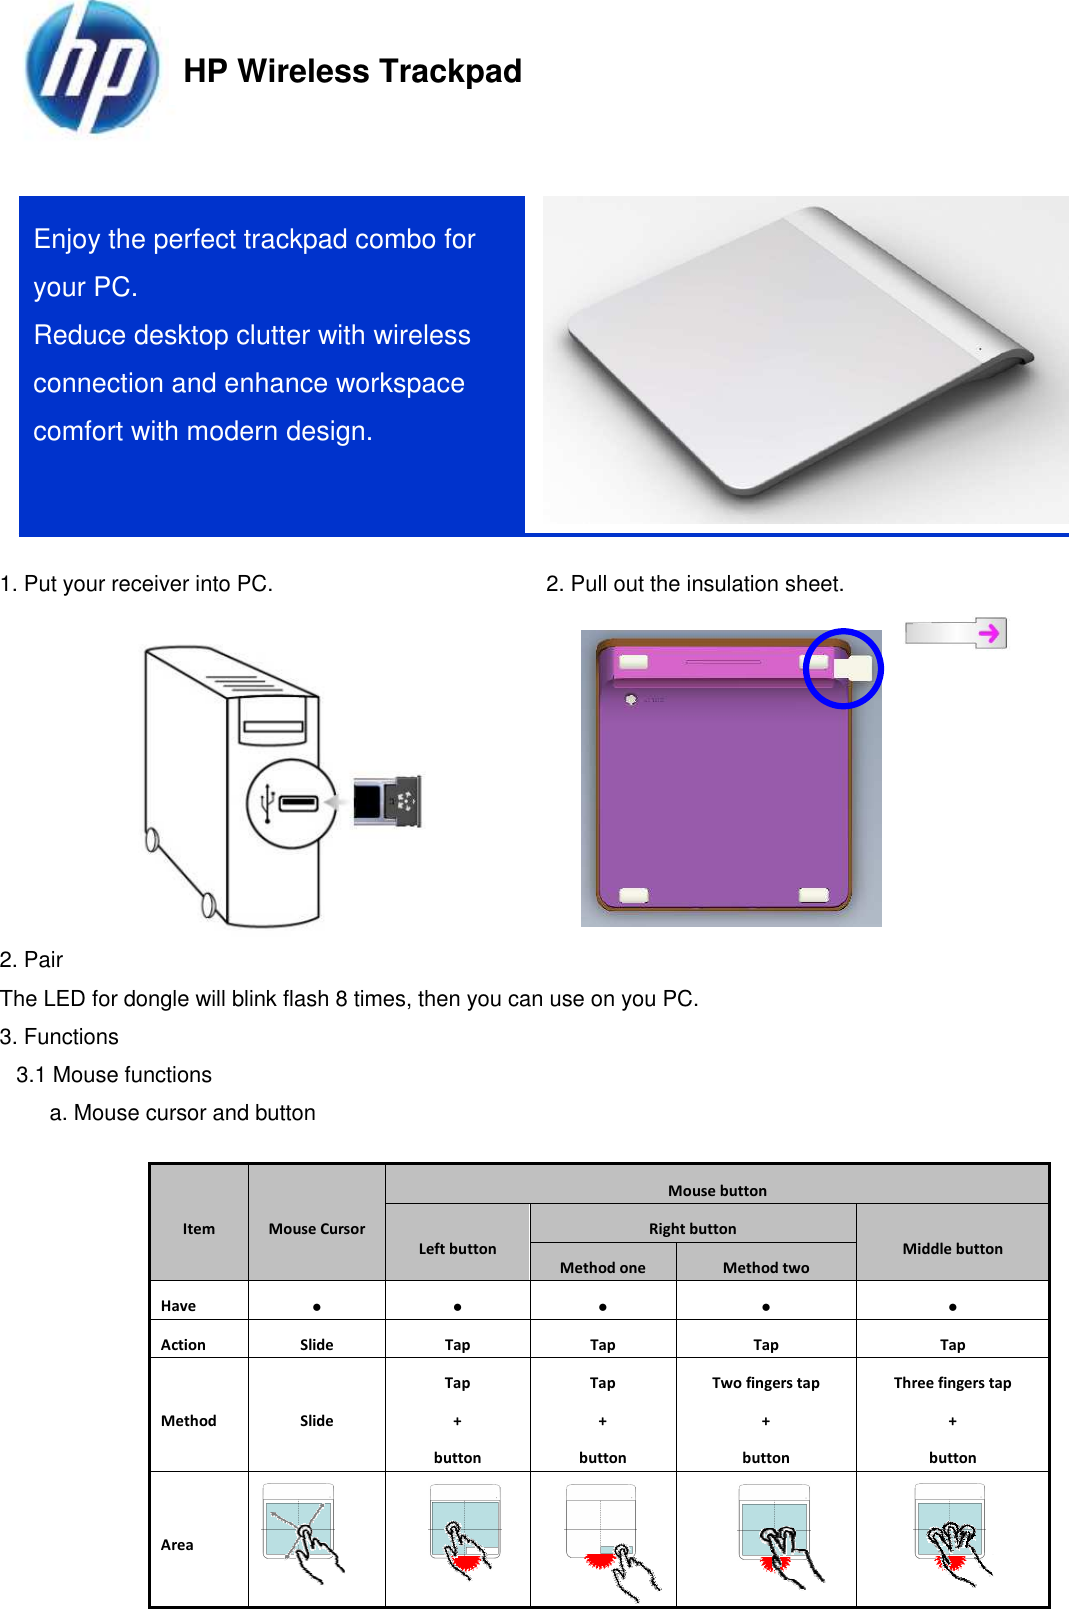                     1. Put your receiver into PC.                                                  2. Pull out the insulation sheet.   2. Pair The LED for dongle will blink flash 8 times, then you can use on you PC. 3. Functions 3.1 Mouse functions a. Mouse cursor and button  Item  Mouse Cursor Mouse button Left button Right button Middle button Method one  Method two Have  ● ● ● ● ● Action  Slide  Tap  Tap  Tap  Tap Method  Slide Tap + button Tap + button Two fingers tap + button Three fingers tap + button Area          Enjoy the perfect trackpad combo for your PC. Reduce desktop clutter with wireless connection and enhance workspace comfort with modern design. HP Wireless Trackpad 